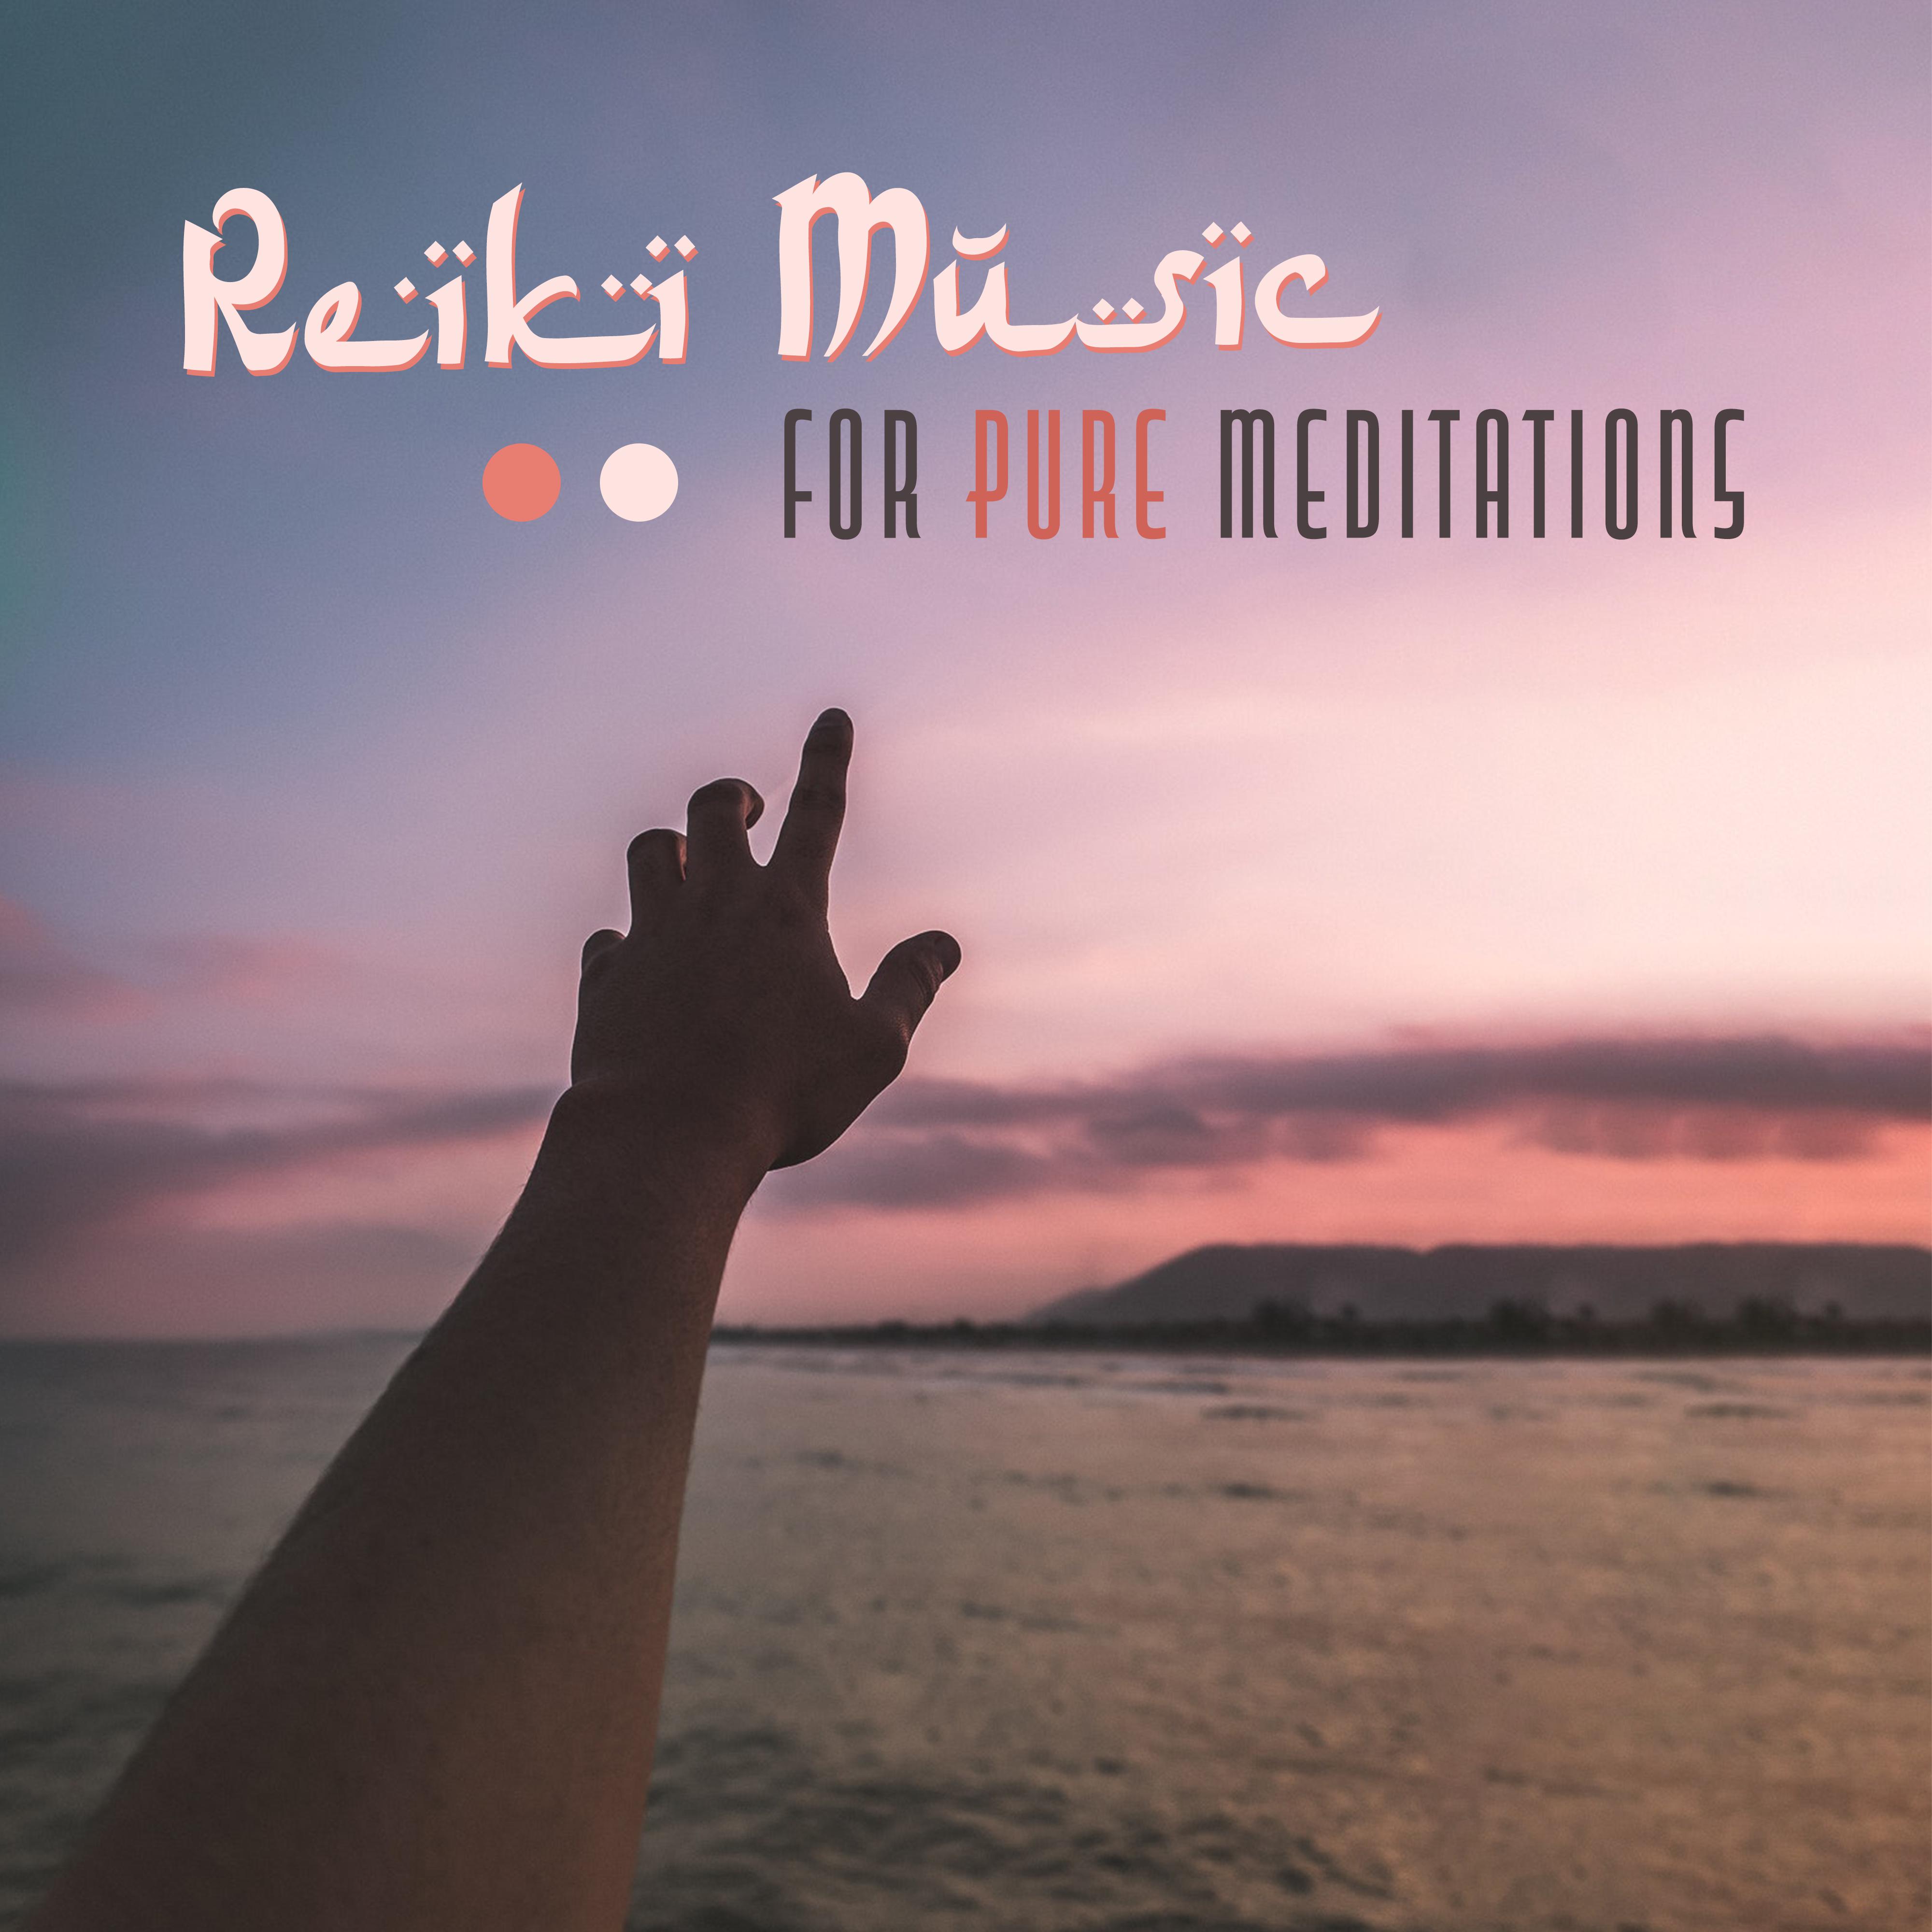 Reiki Music for Pure Meditations: 2019 New Age Songs for Yoga Training & Deep Relaxation